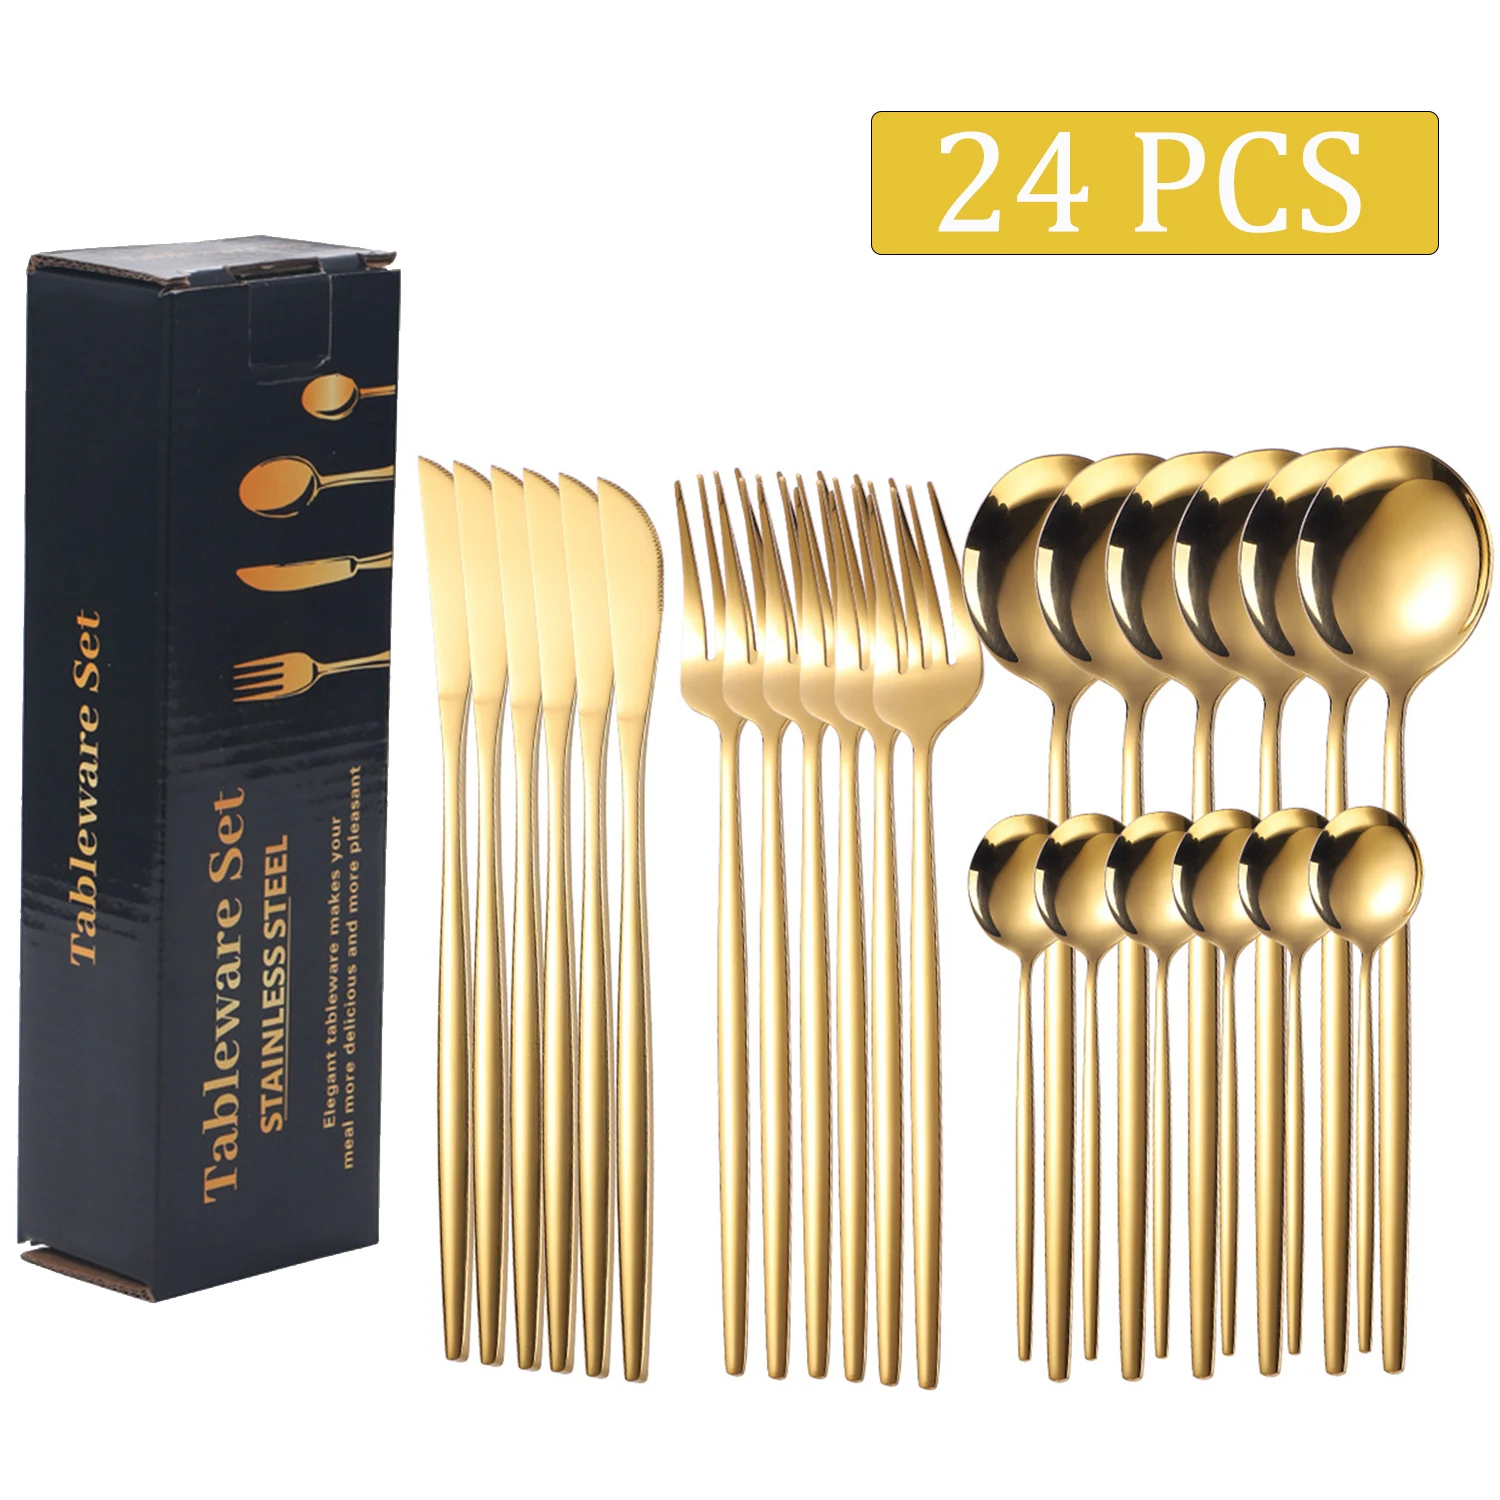 

24pcs Stainless Steel Flatware Set Service for 6 Tableware Cutlery Set Include Spoons Forks Knives for Kitchen Home Restaurant